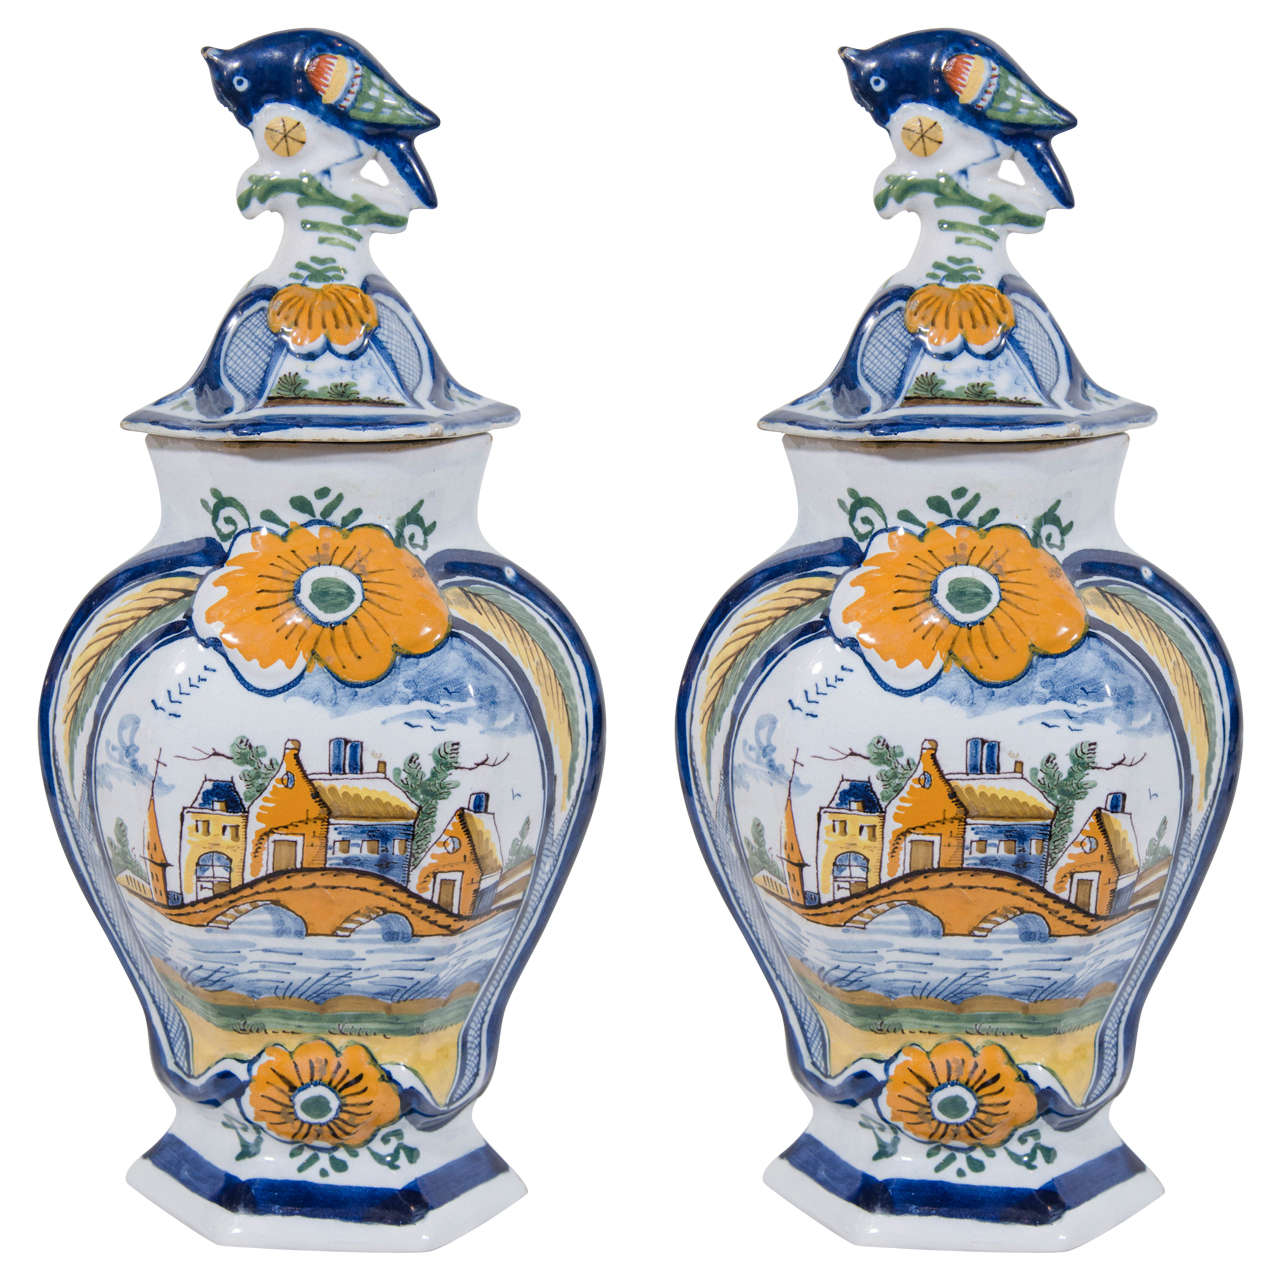 Pair of Dutch Delft Polychrome Mantle Vases Painted in Orange, Blue and Green